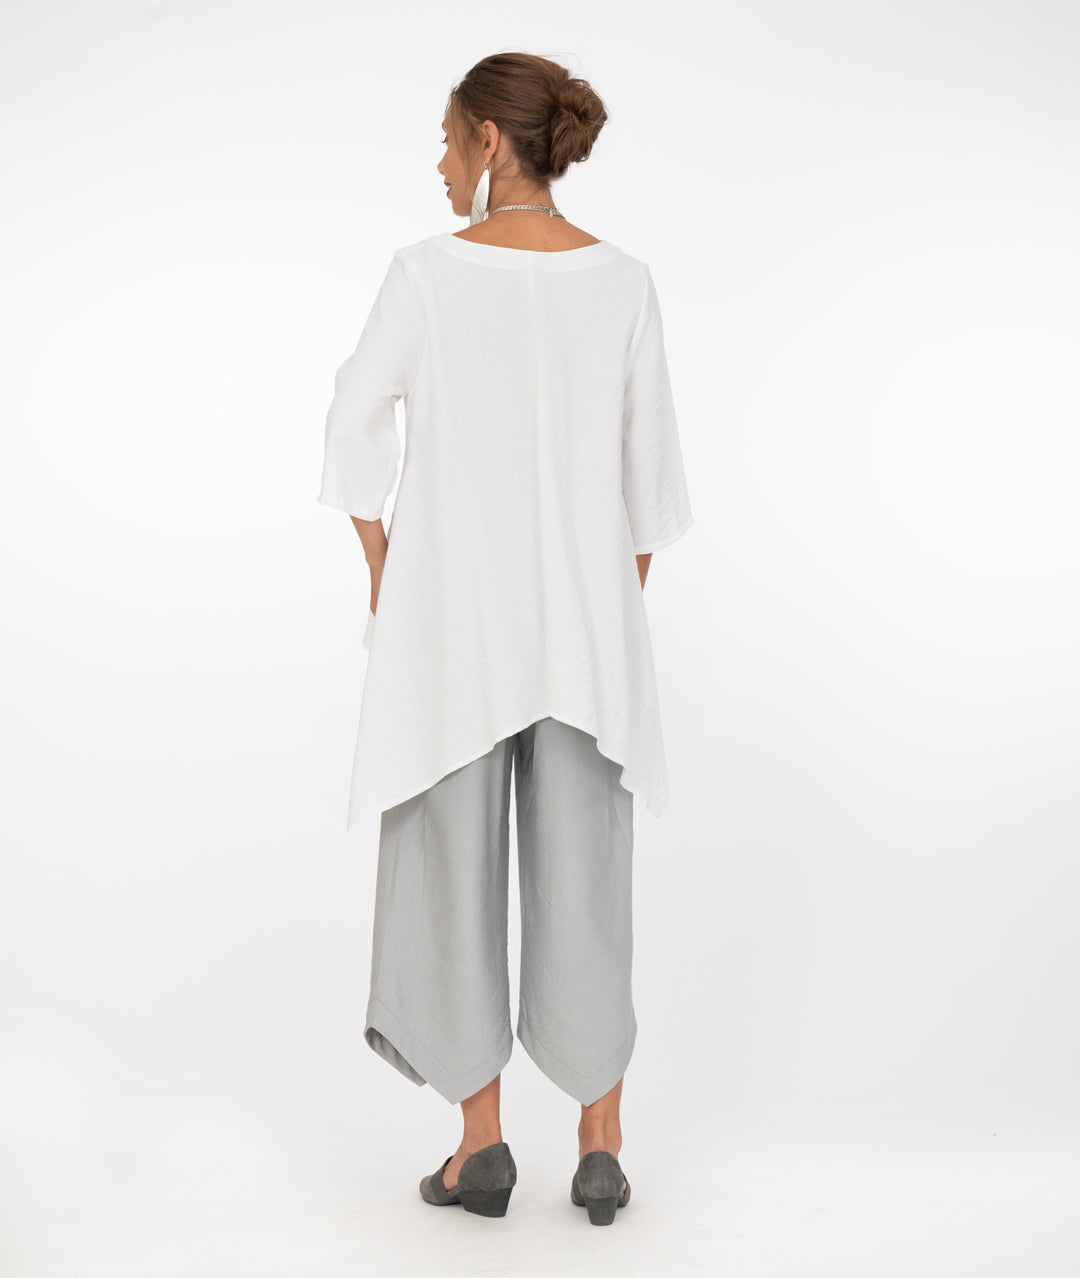 model in a grey pant with a pointed hem, worn with a white tunic with a long back